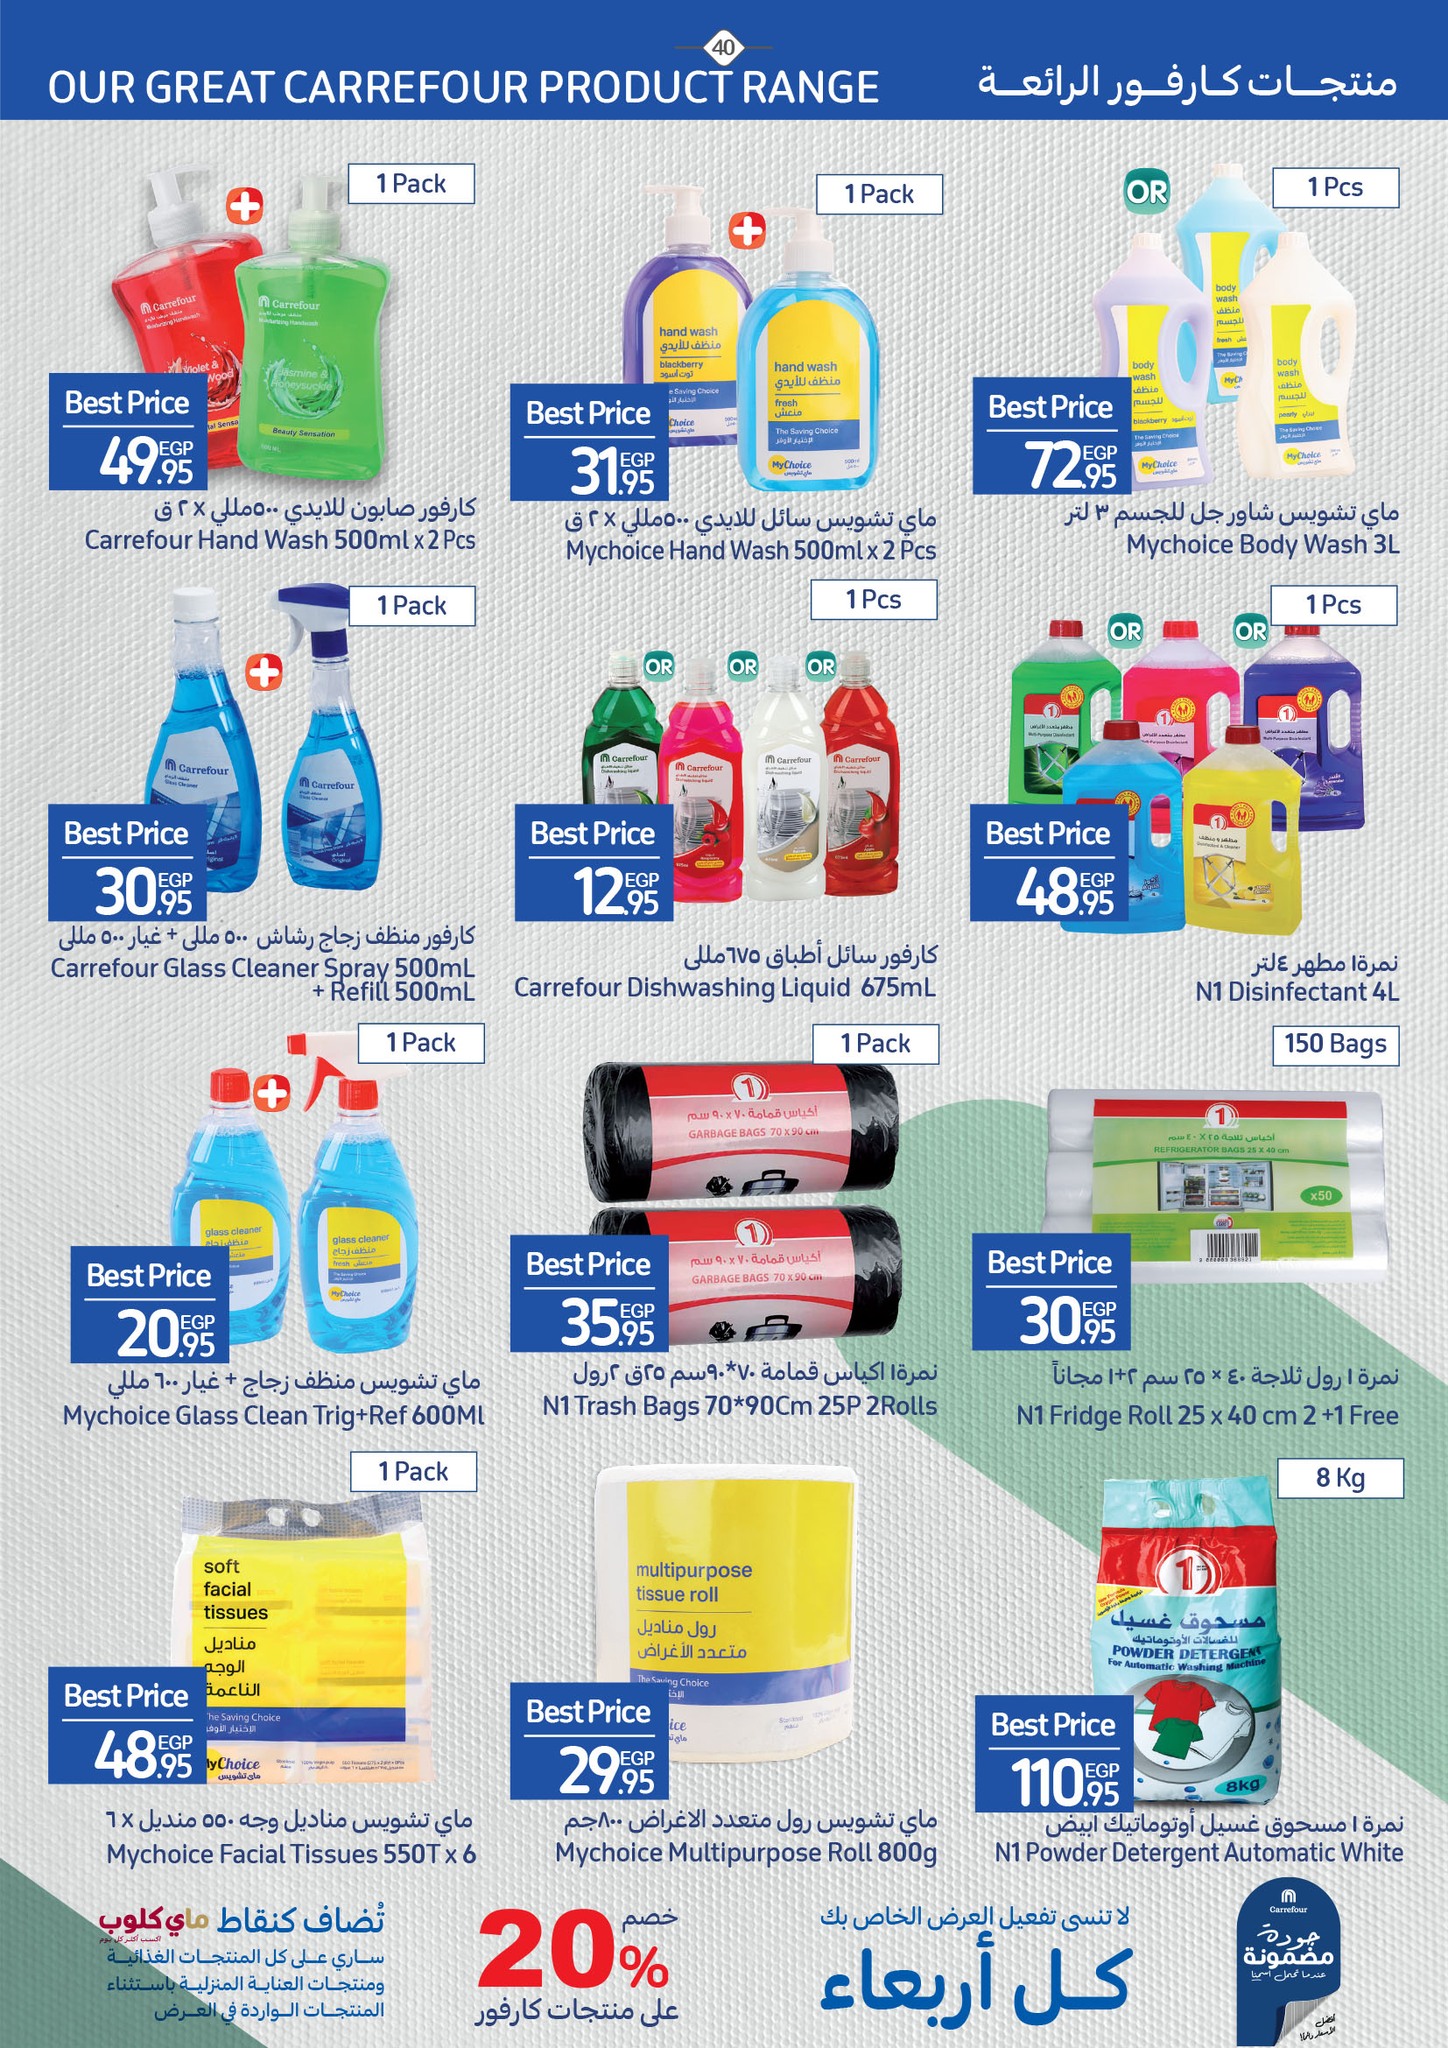 Watch the latest Carrefour half price offers "Last Chance Offer" until December 4th 40